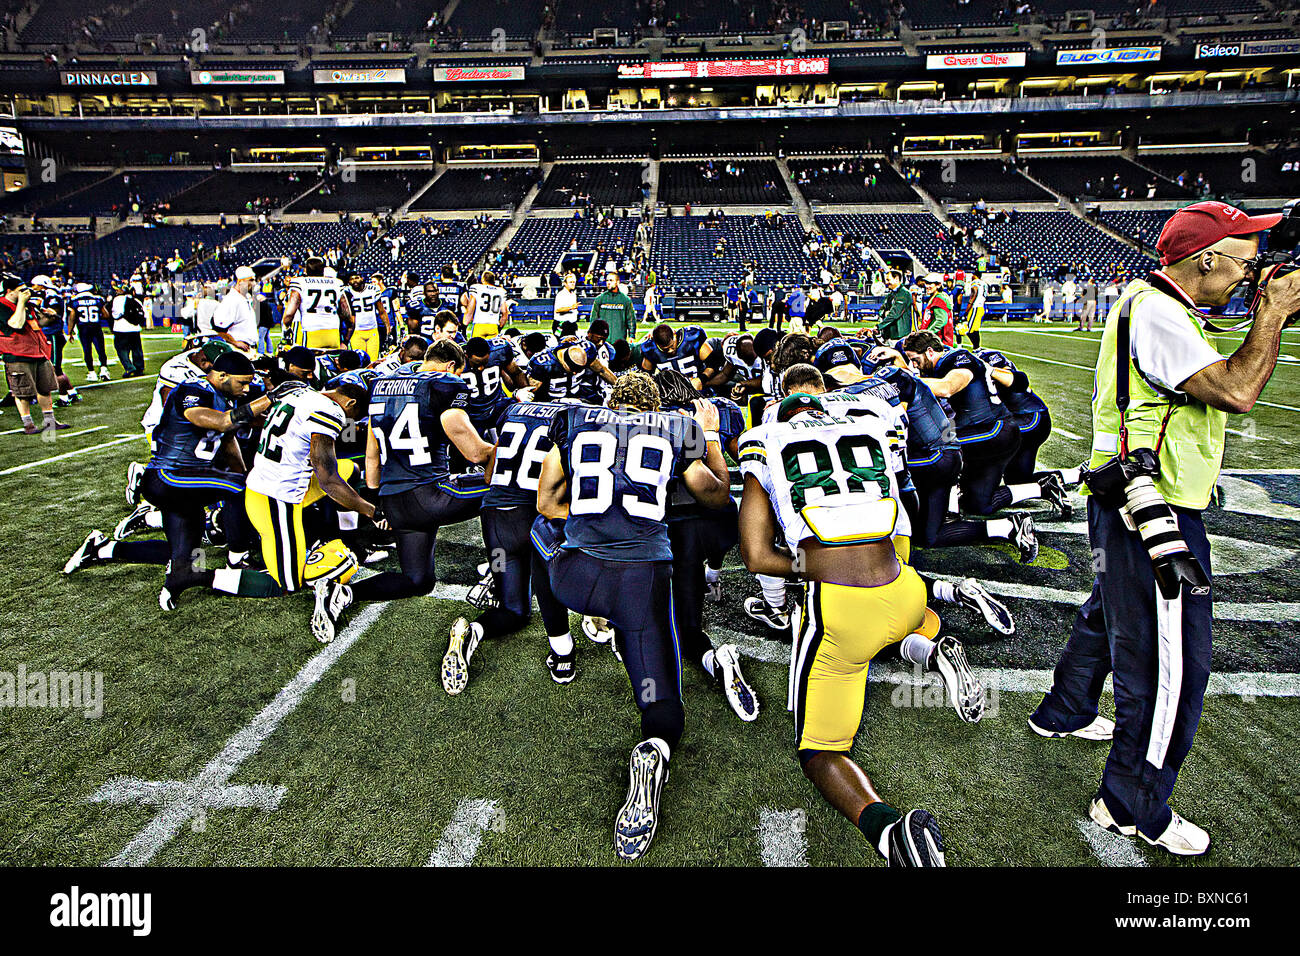 Seattle Seahawks and the Green Bay Packers praying after an NFL football game Stock Photo